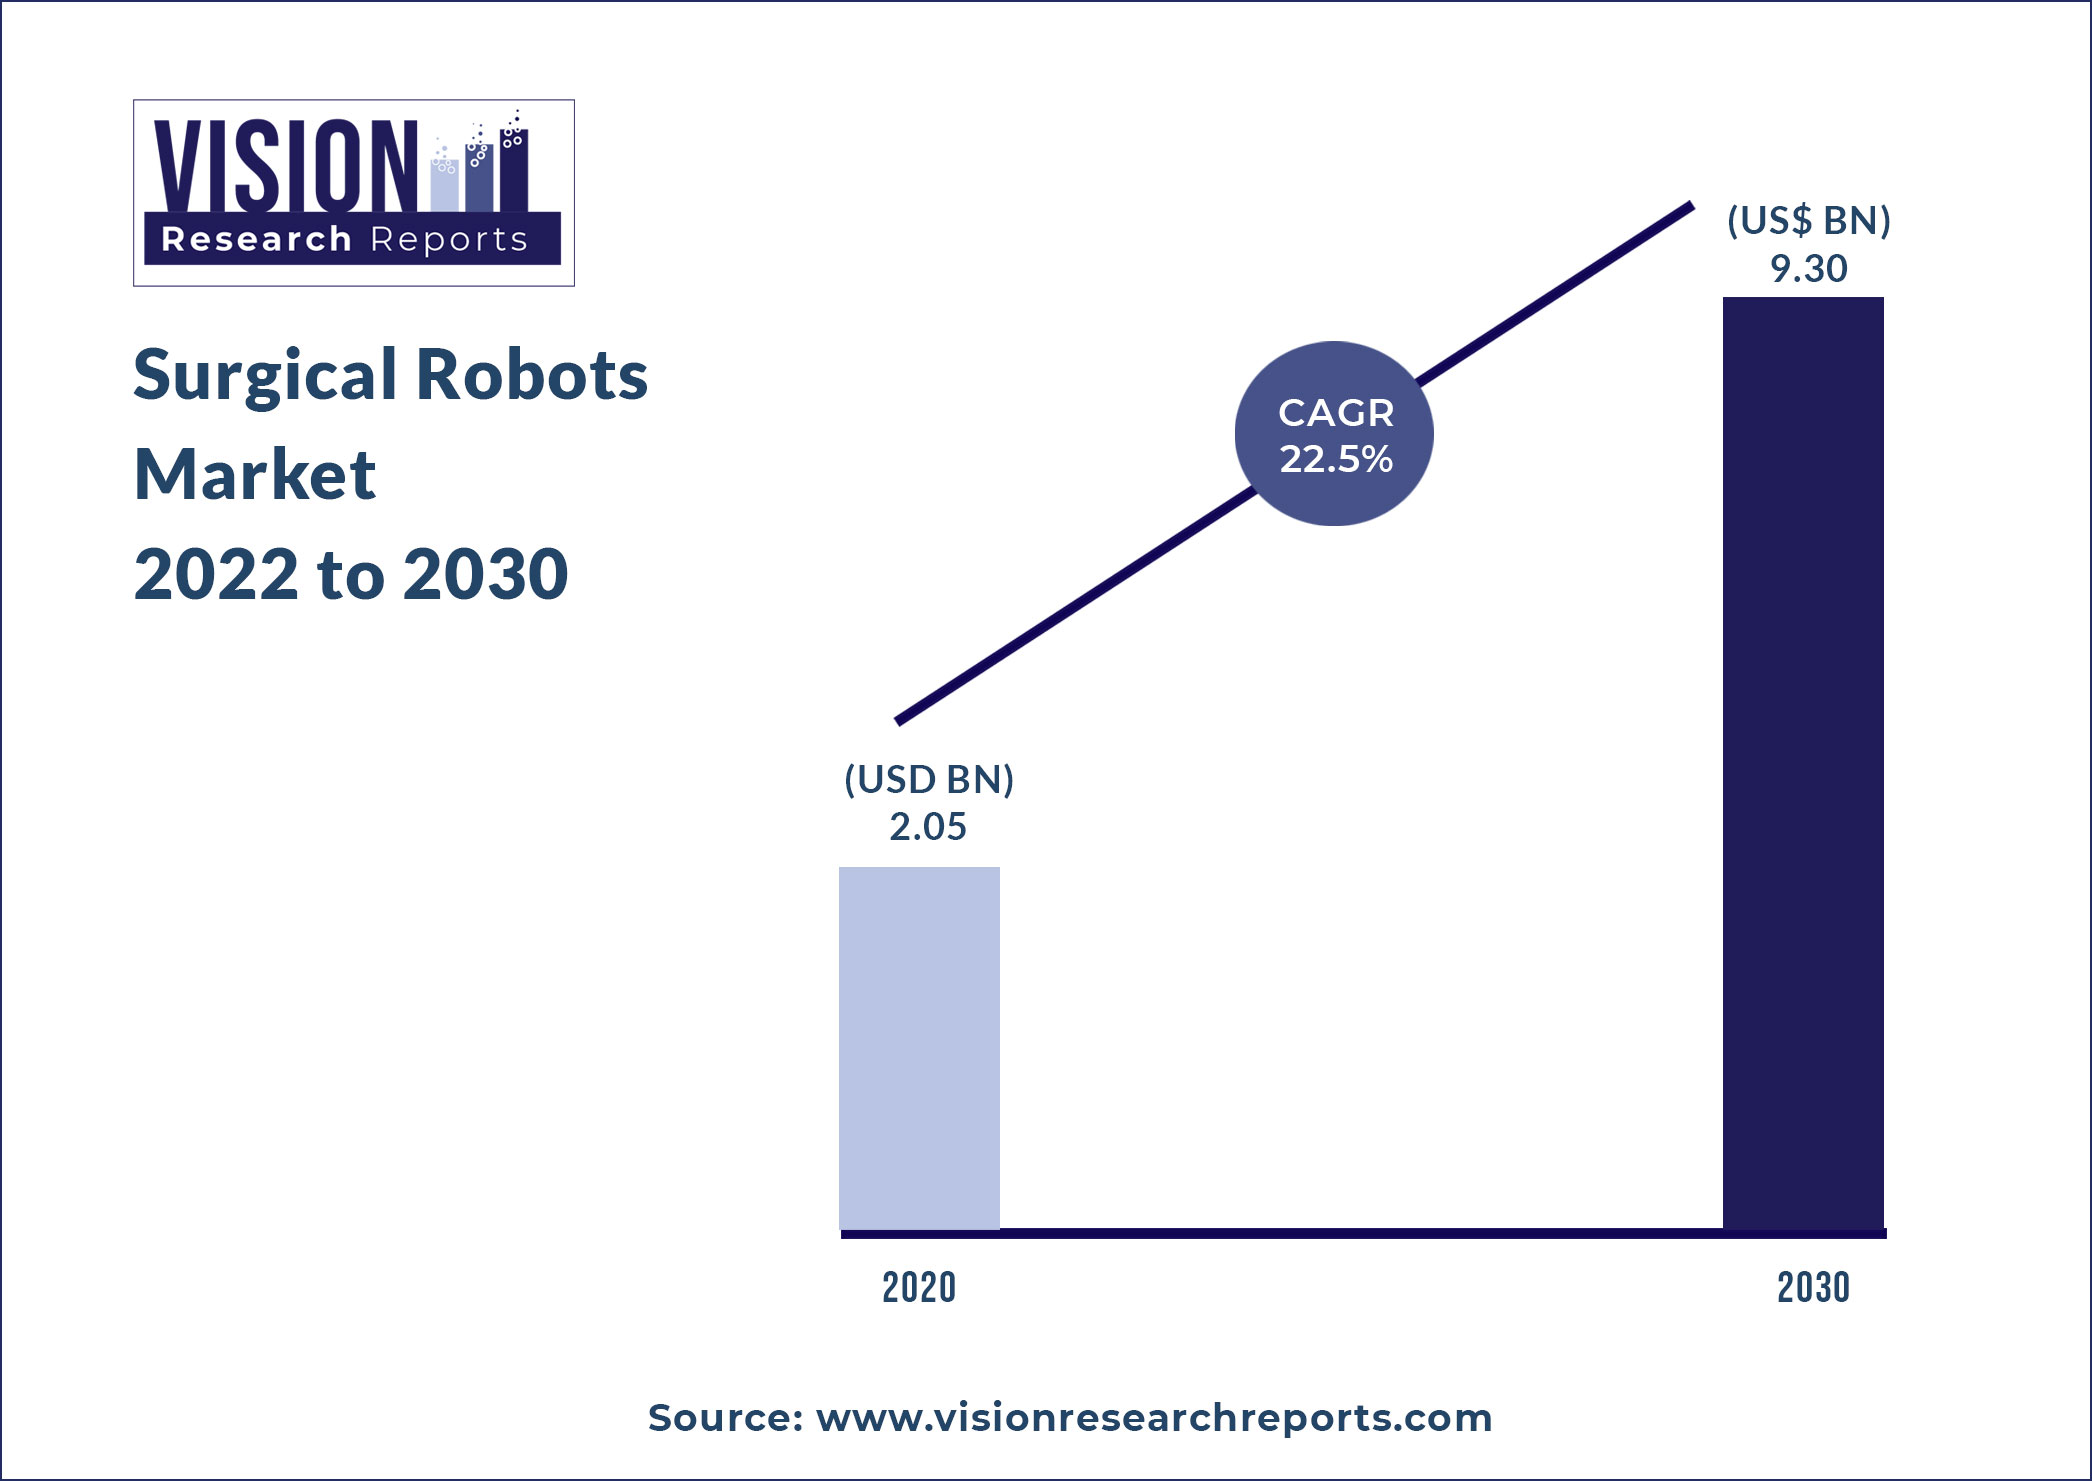 Surgical Robots Market Size 2022 to 2030